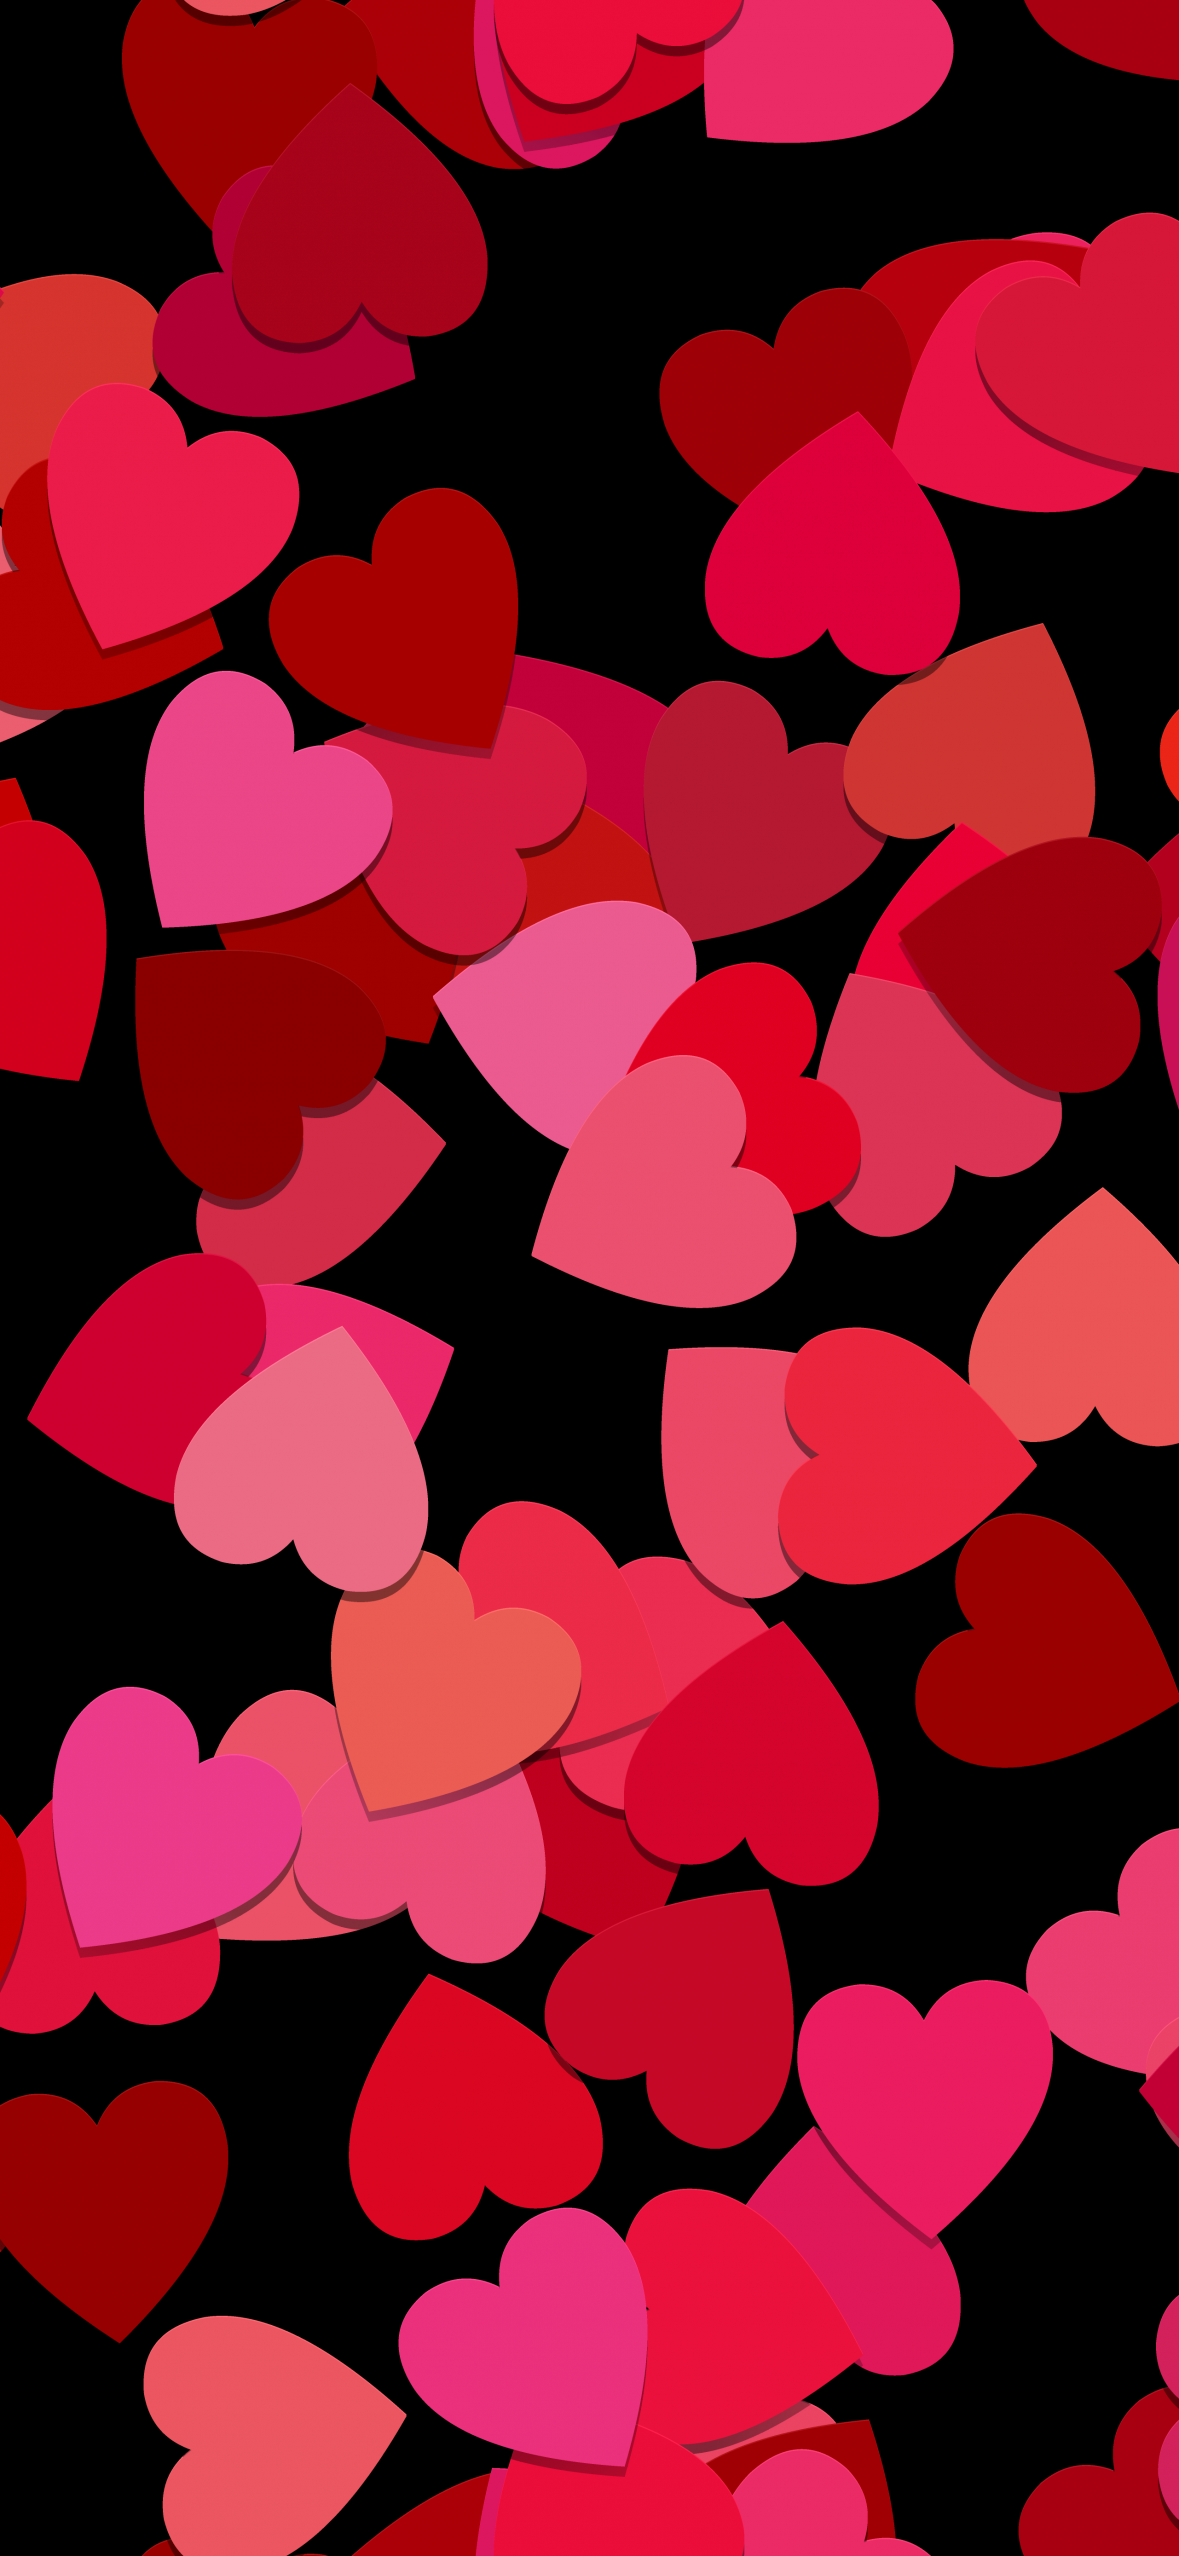 Purple Hearts Wallpaper Images  Free Photos PNG Stickers Wallpapers   Backgrounds  rawpixel